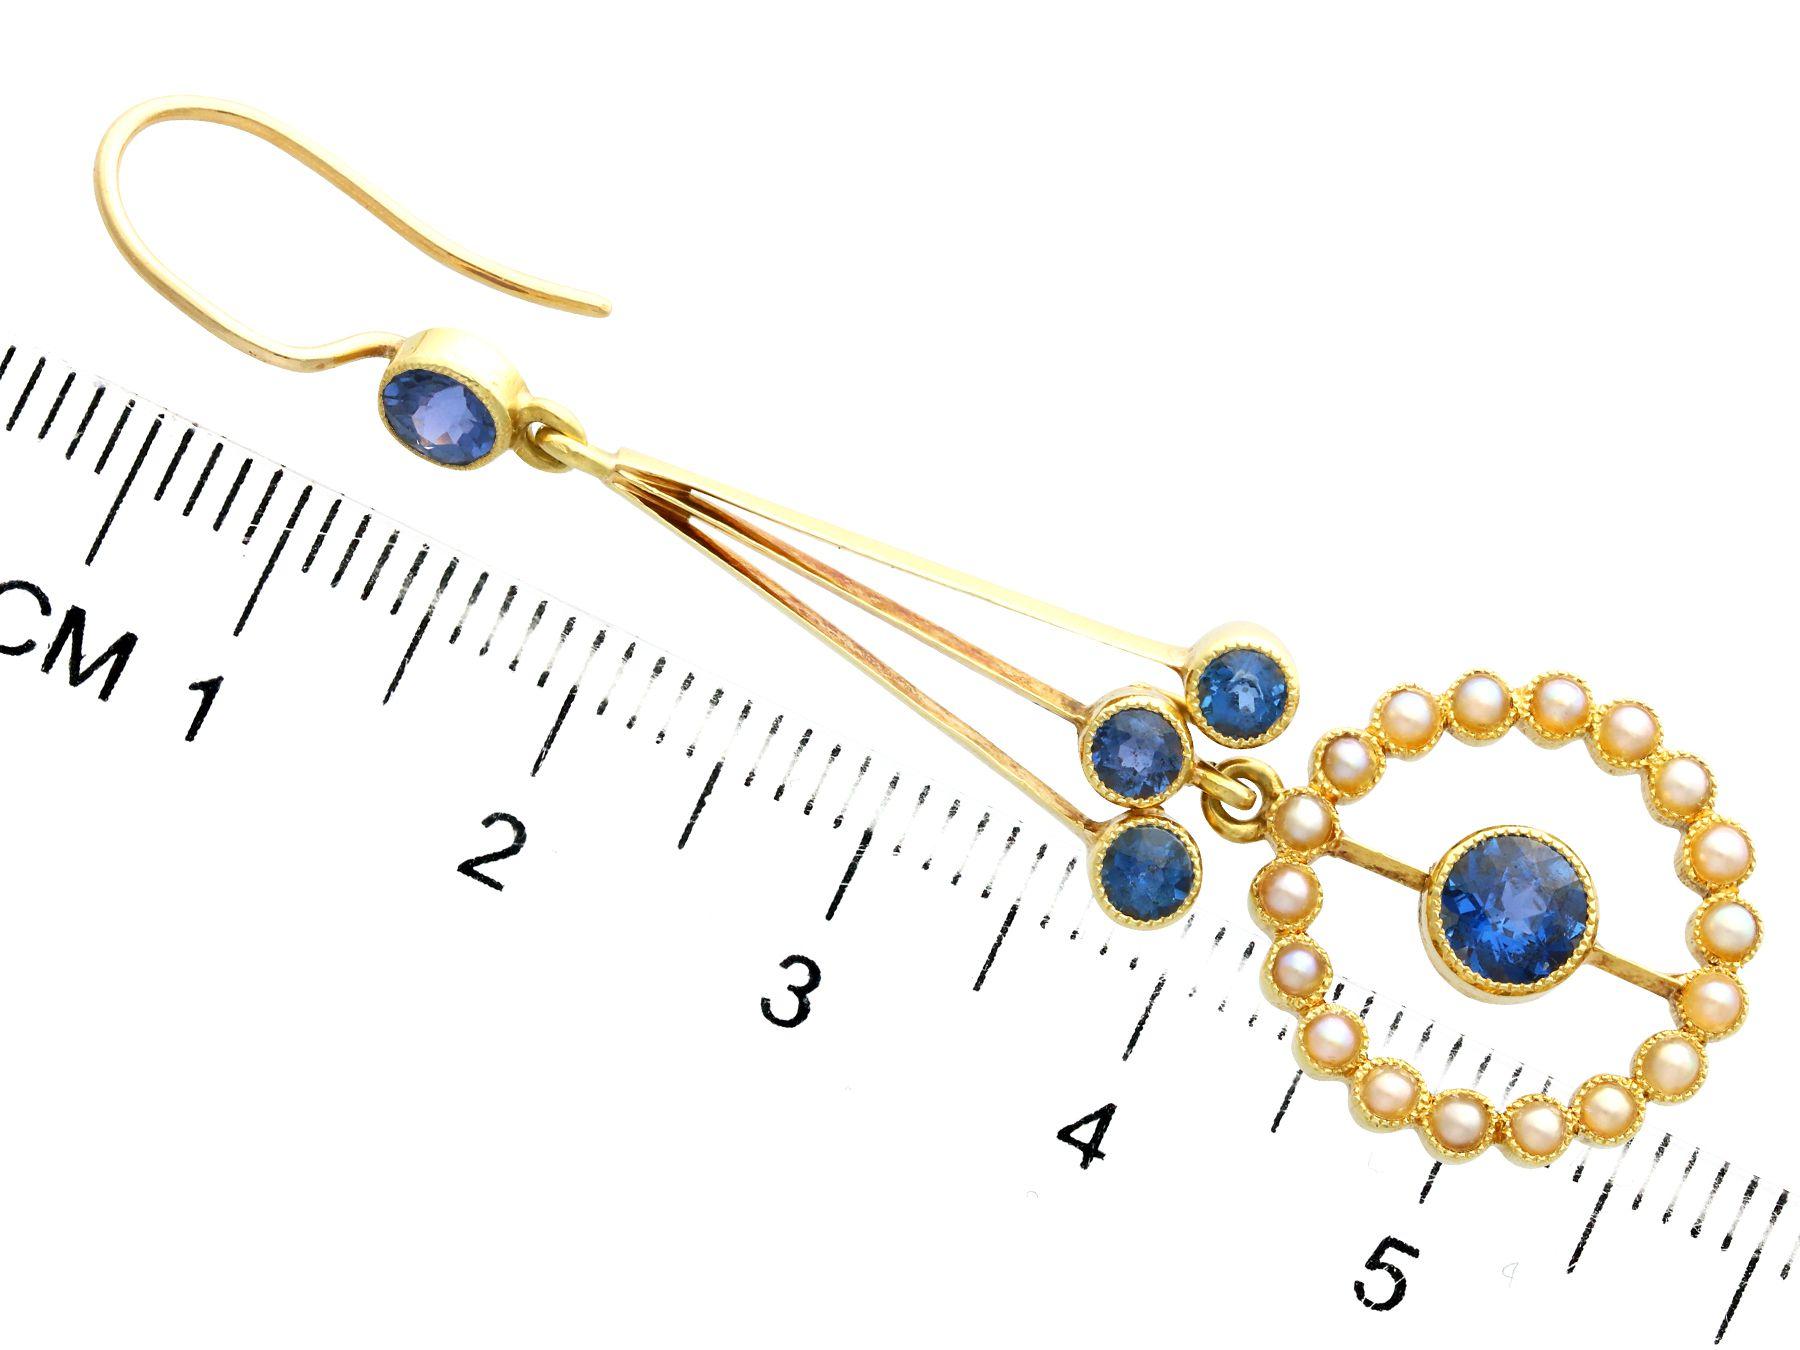 Antique 2.02 Carat Sapphire Seed Pearl Yellow Gold Drop Earrings, circa 1910 In Excellent Condition For Sale In Jesmond, Newcastle Upon Tyne